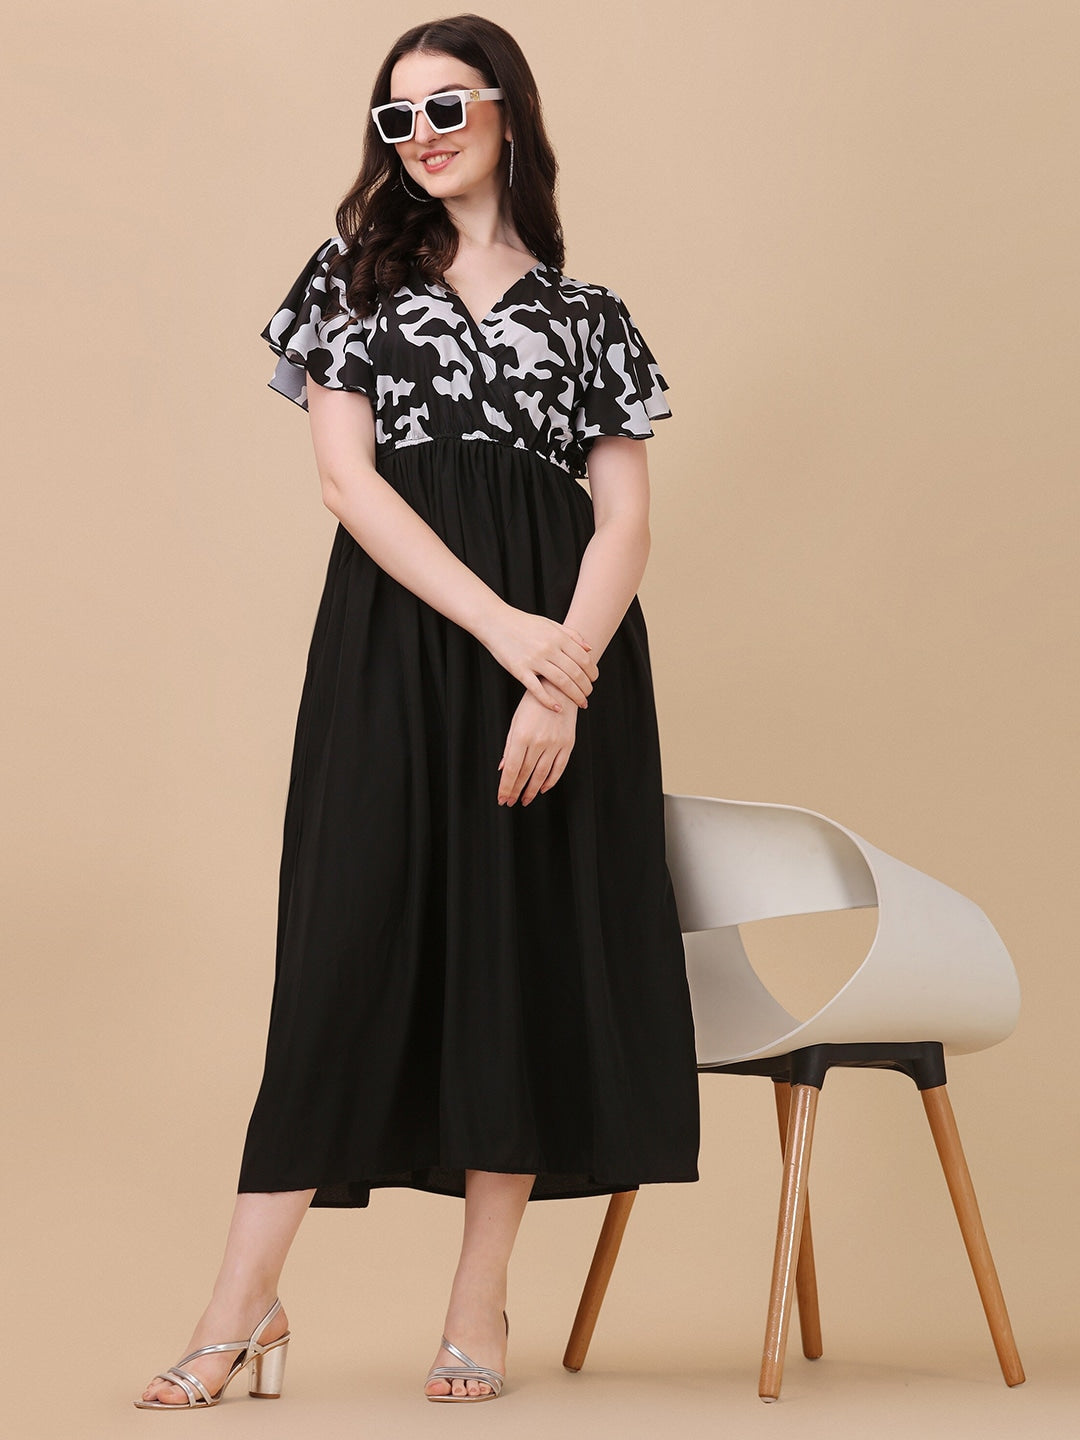 Elegant White And Black Contrast Maxi Dress For Women Perfect For Summer  Casual Wear Three Quarter Frill Sleeves Plus Size Available 210316 From  Lu006, $37.13 | DHgate.Com